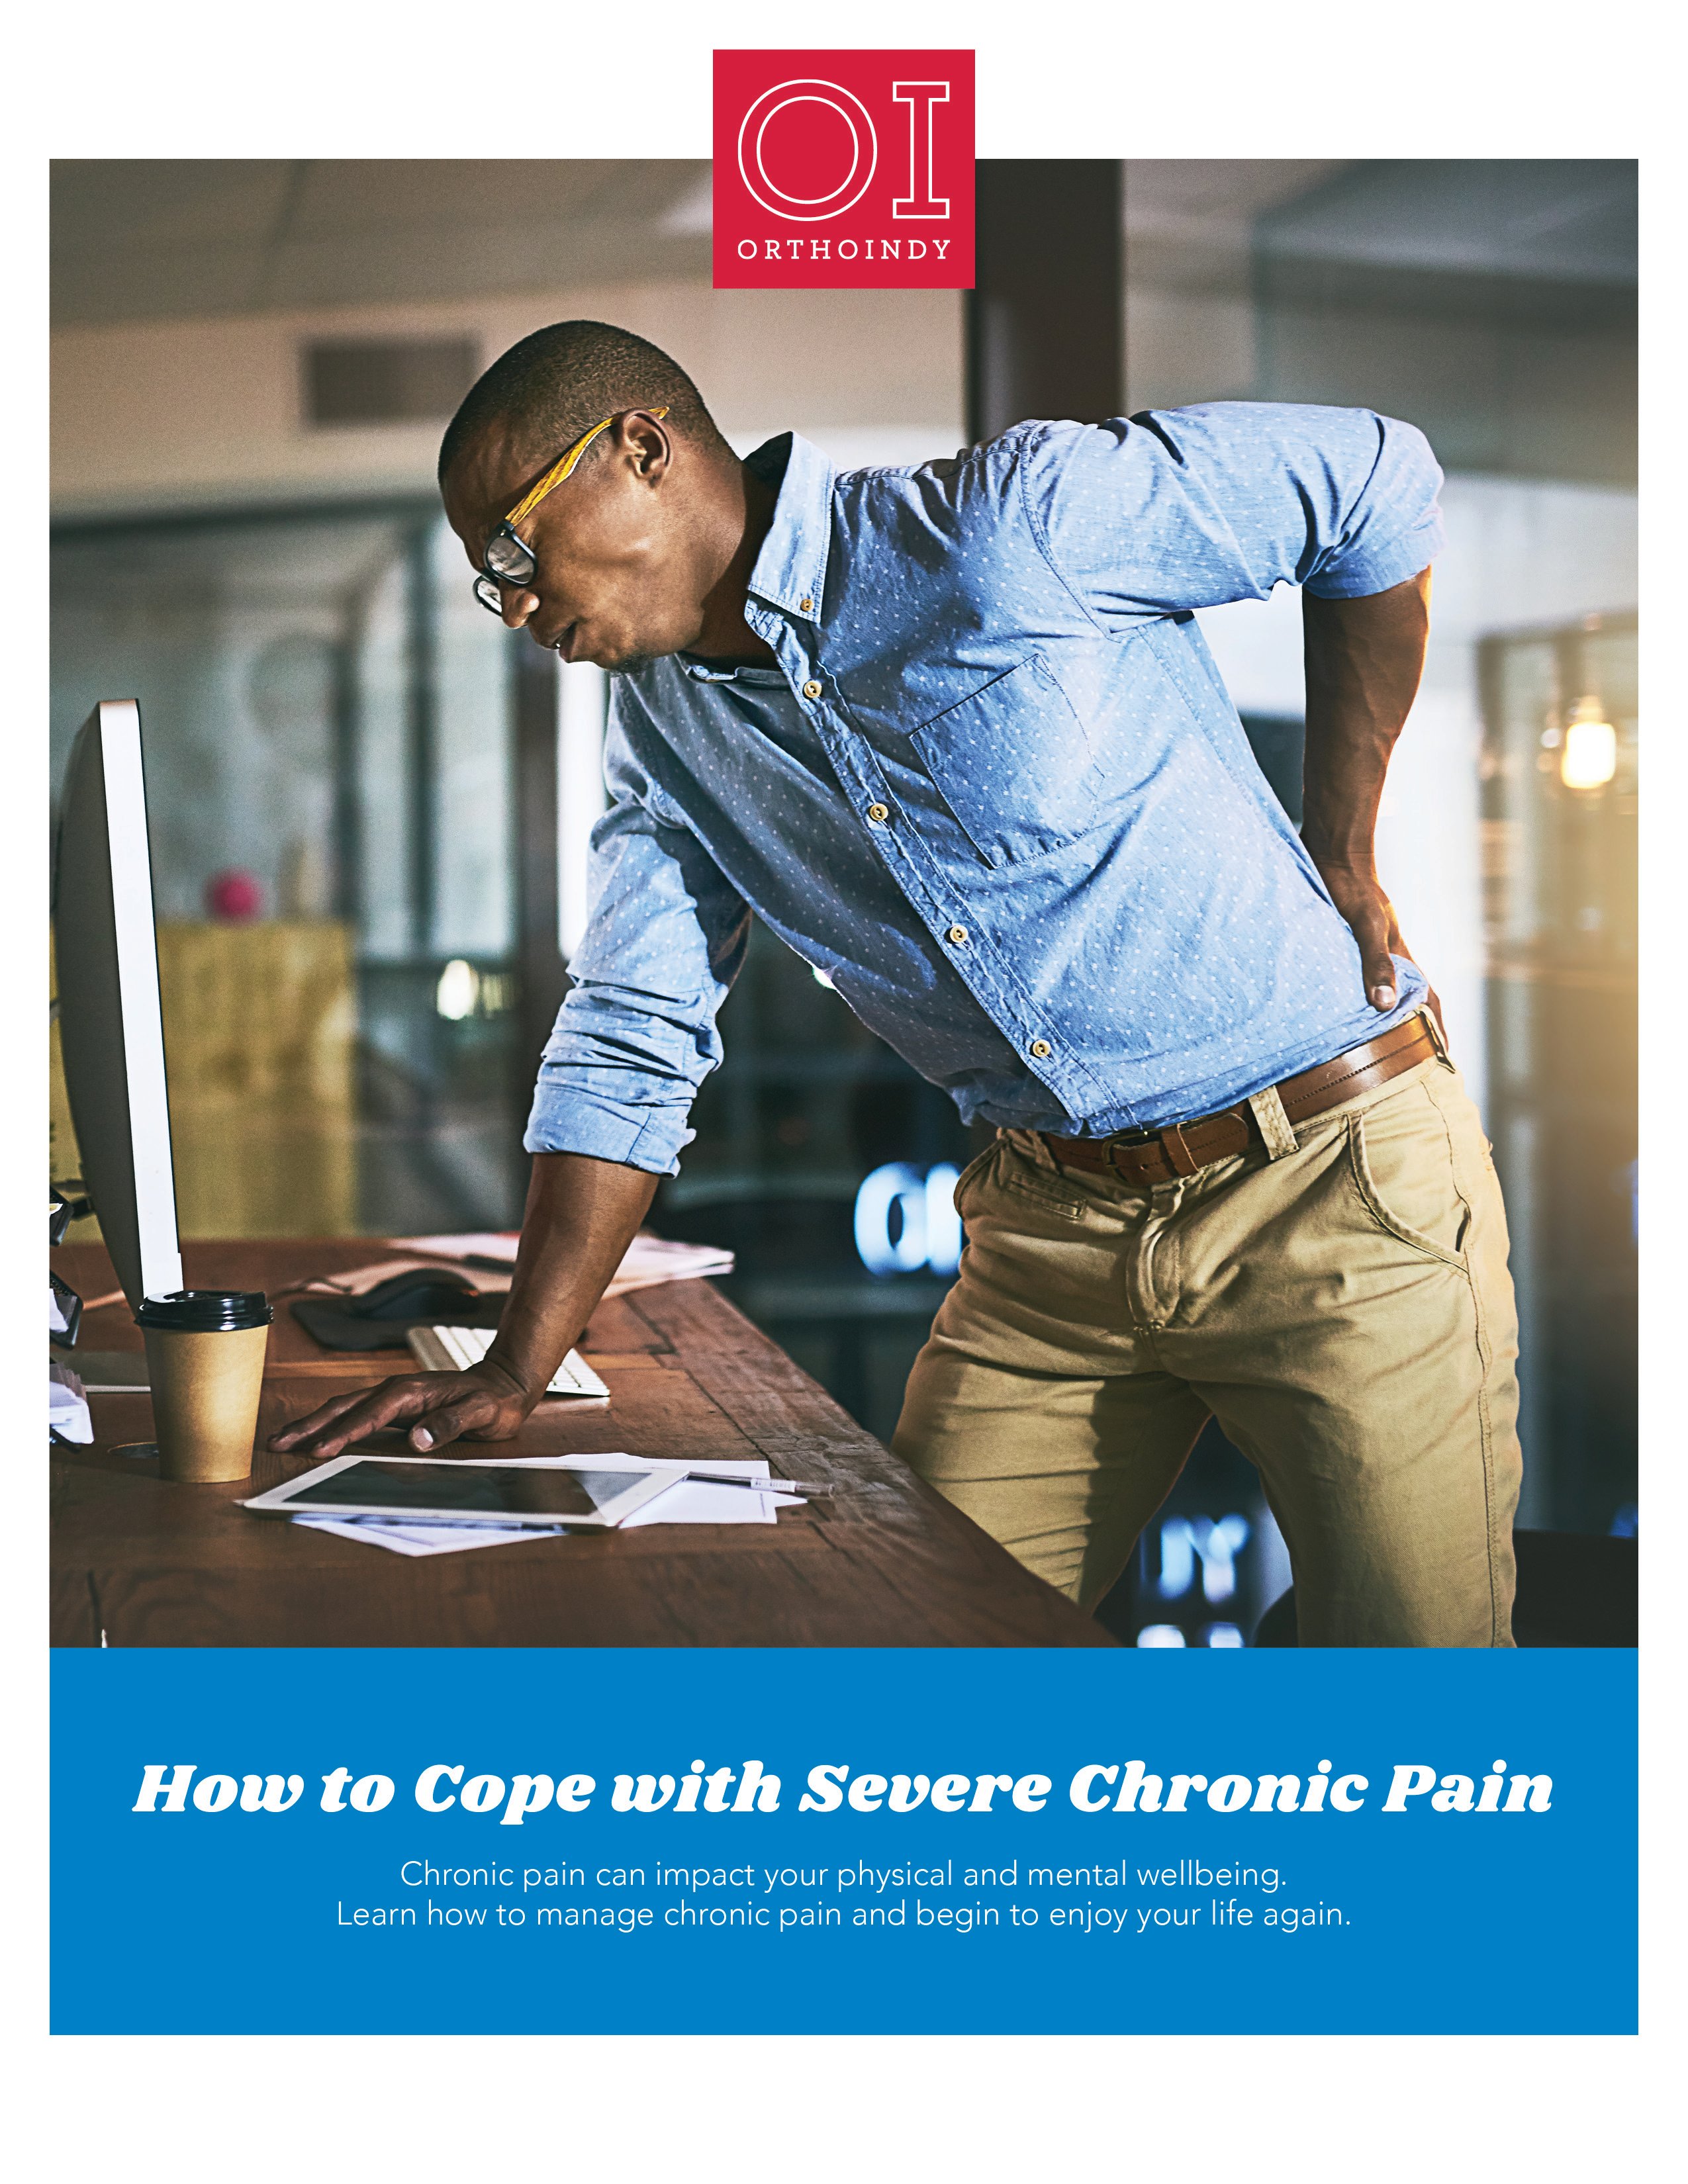 How to cope with severe chronic pain